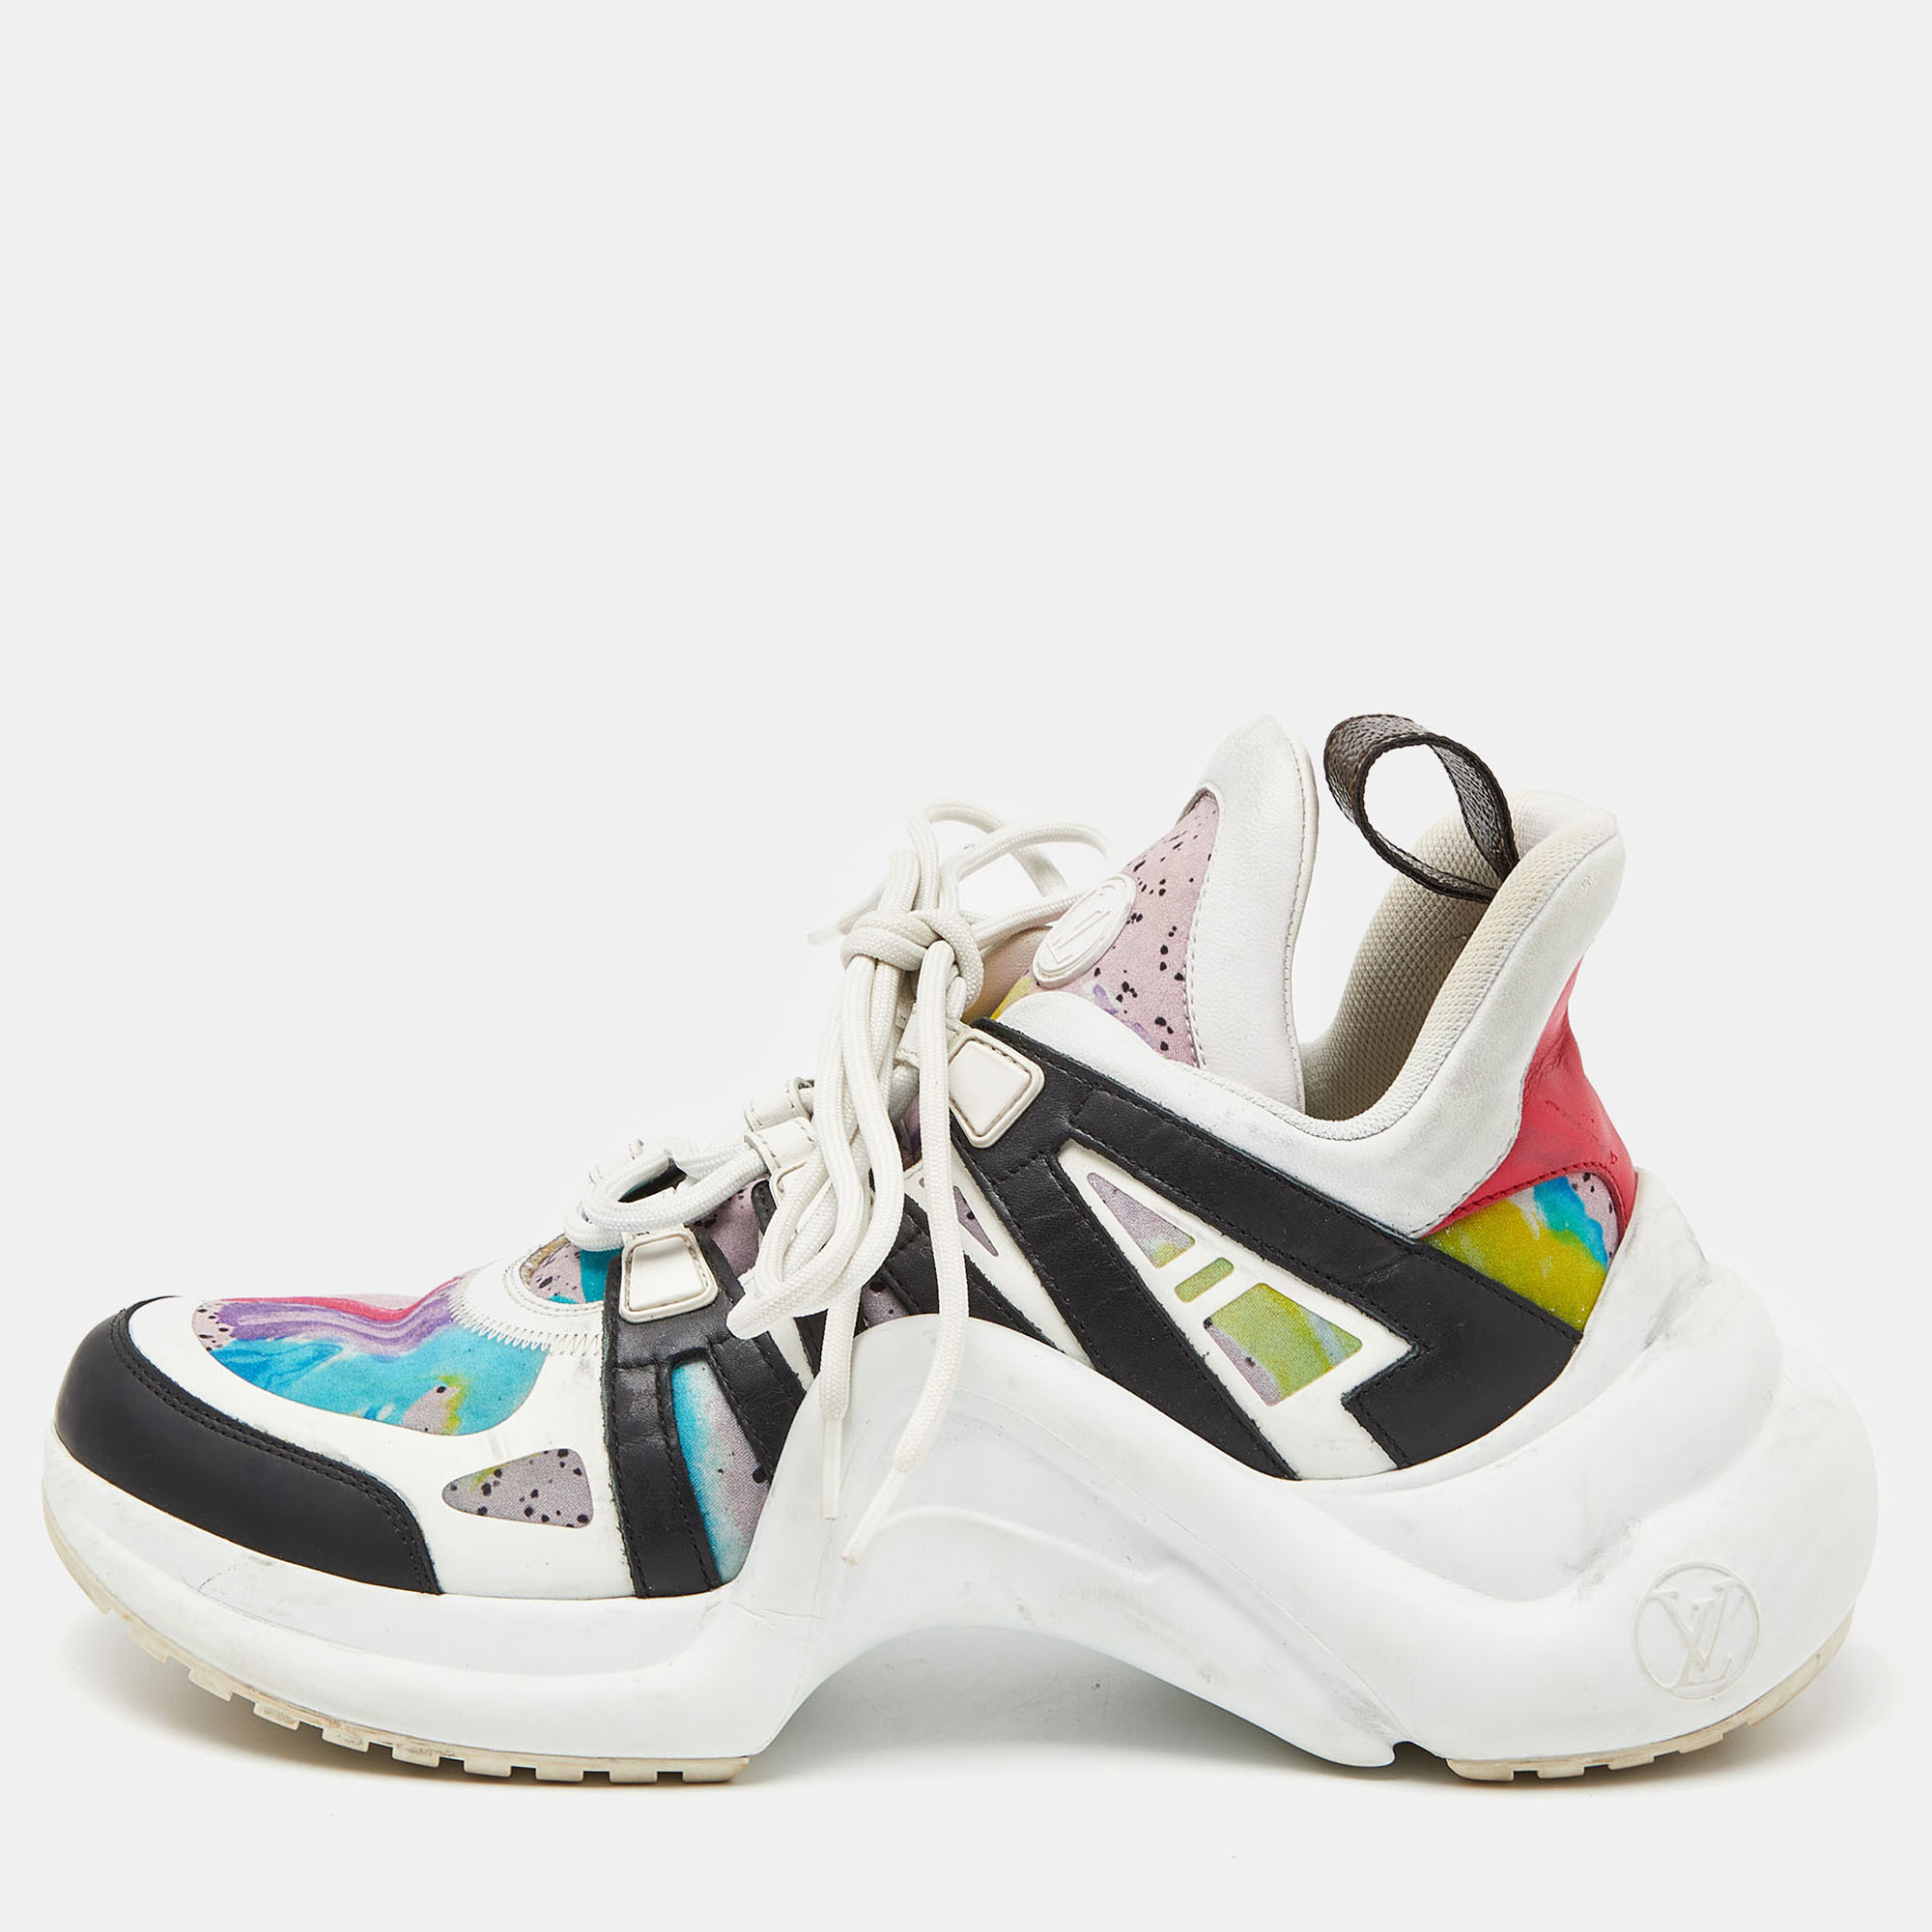 The Spring/Summer 2018 collection by Louis Vuitton introduced us to the Archlight sneakers at a time when the fever of chunky sneakers had just set in. The design is characterized by a futuristic vibe with a tinge of influence from vintage basketball sneakers. These ones are made from prime quality materials and they carry exaggerated tongues and springy wave shaped soles. They are finished with lace ups on the vamps.